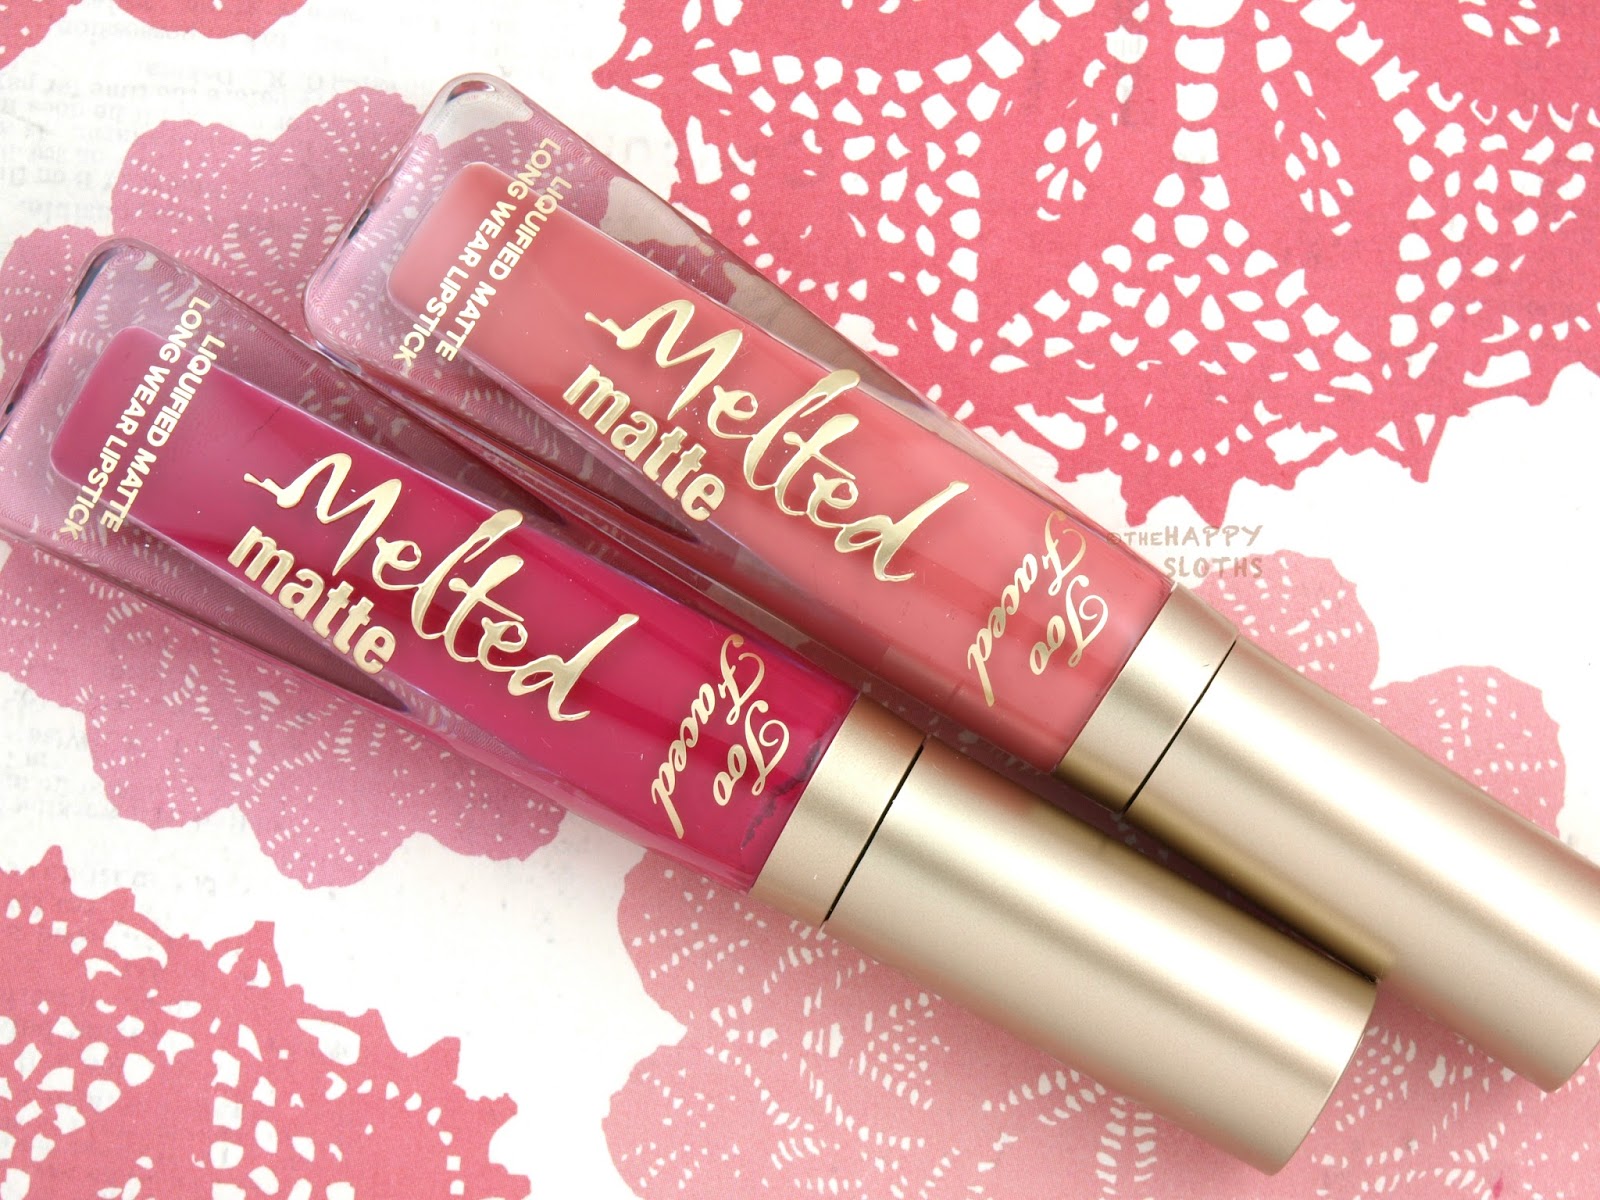 Onhandig Sanders geweld Too Faced Melted Matte Liquified Matte Long Wear Lipstick in "It's  Happening" & "Feelin' Myself": Review and Swatches | The Happy Sloths:  Beauty, Makeup, and Skincare Blog with Reviews and Swatches